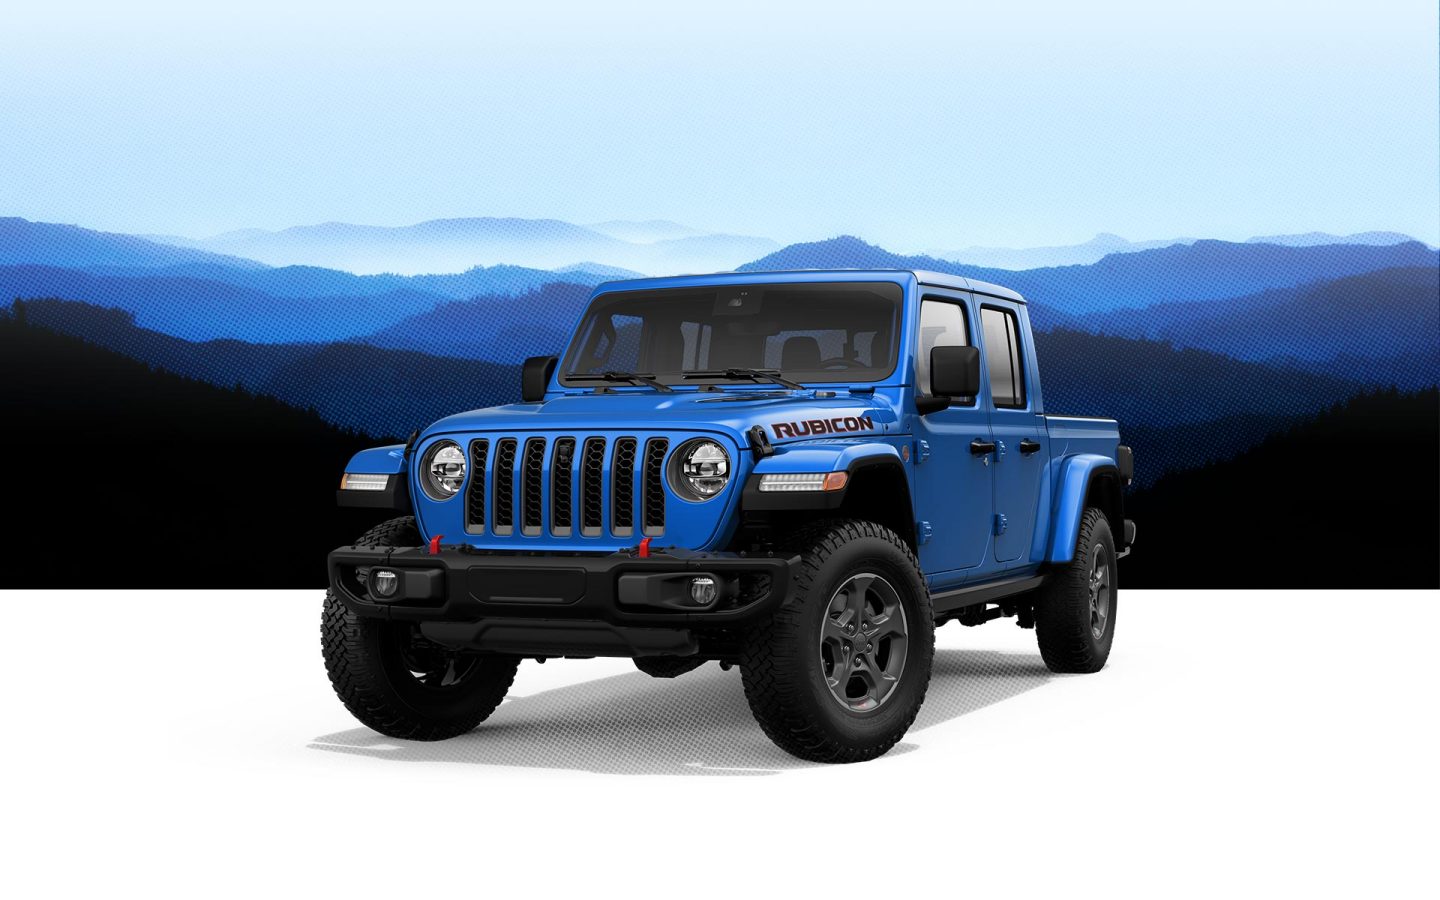 Blue gladiator Rubicon posed in front of a foggy blue mountain landscape